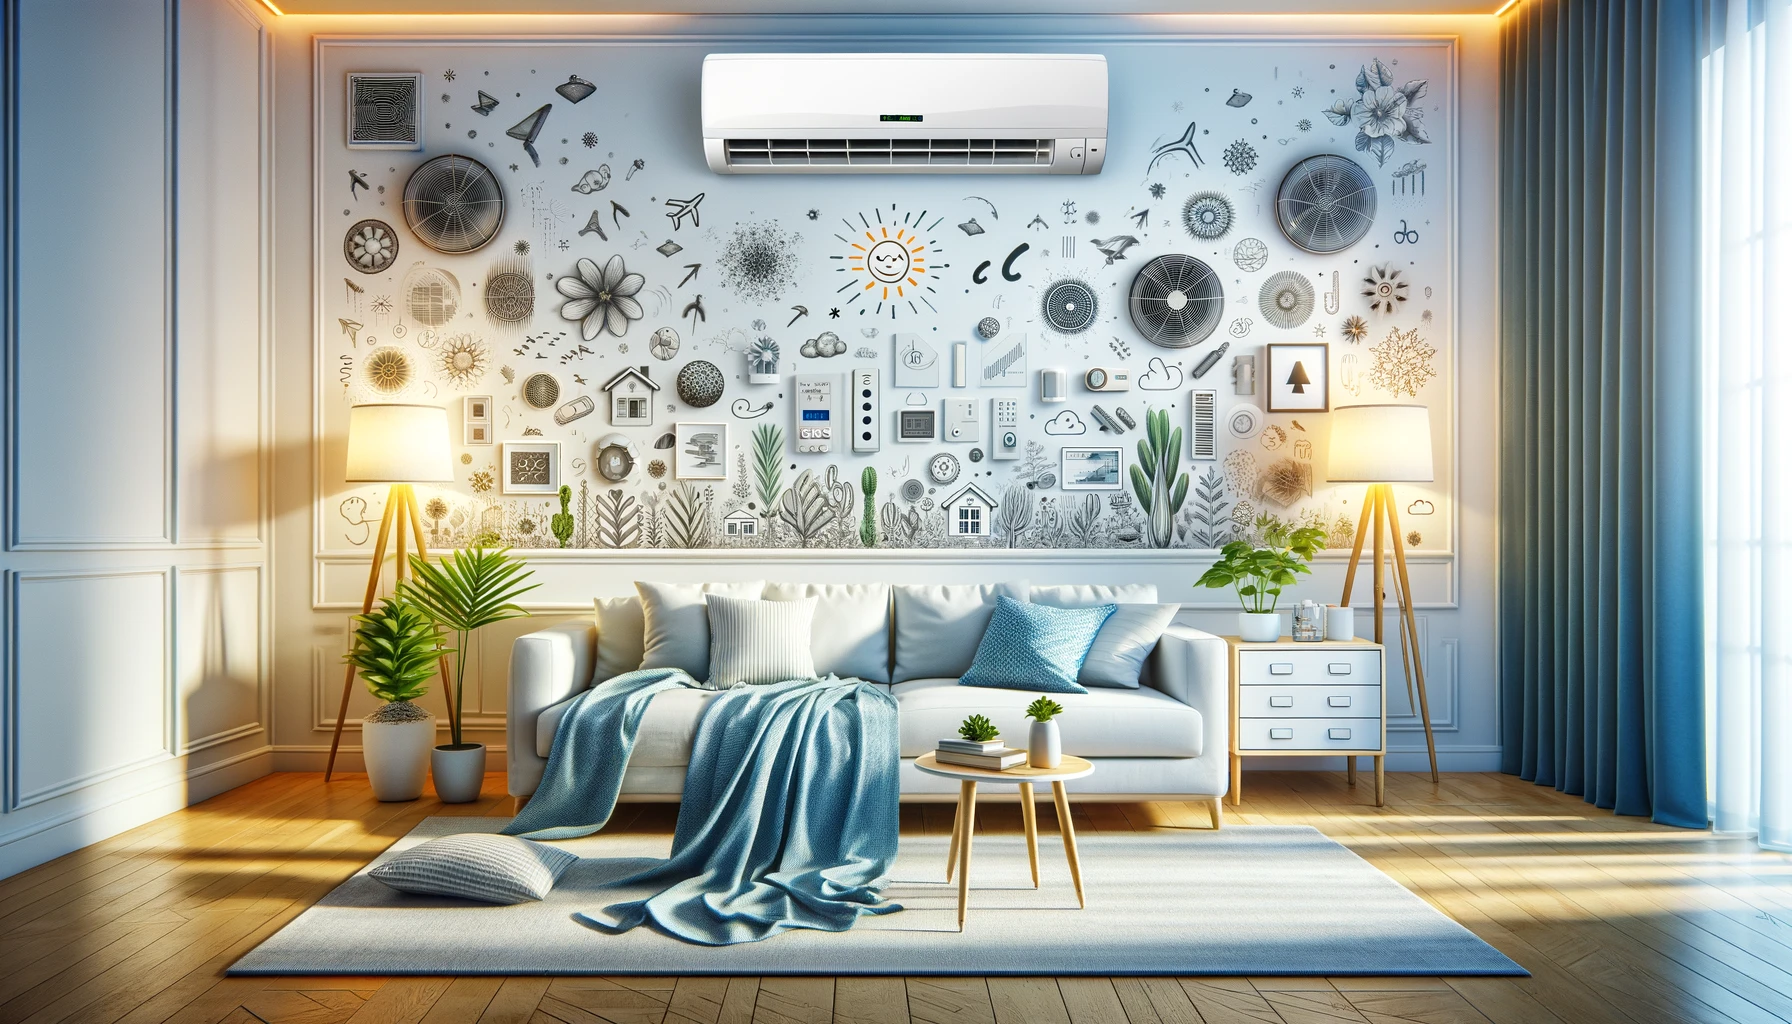 Airconditioning in huis